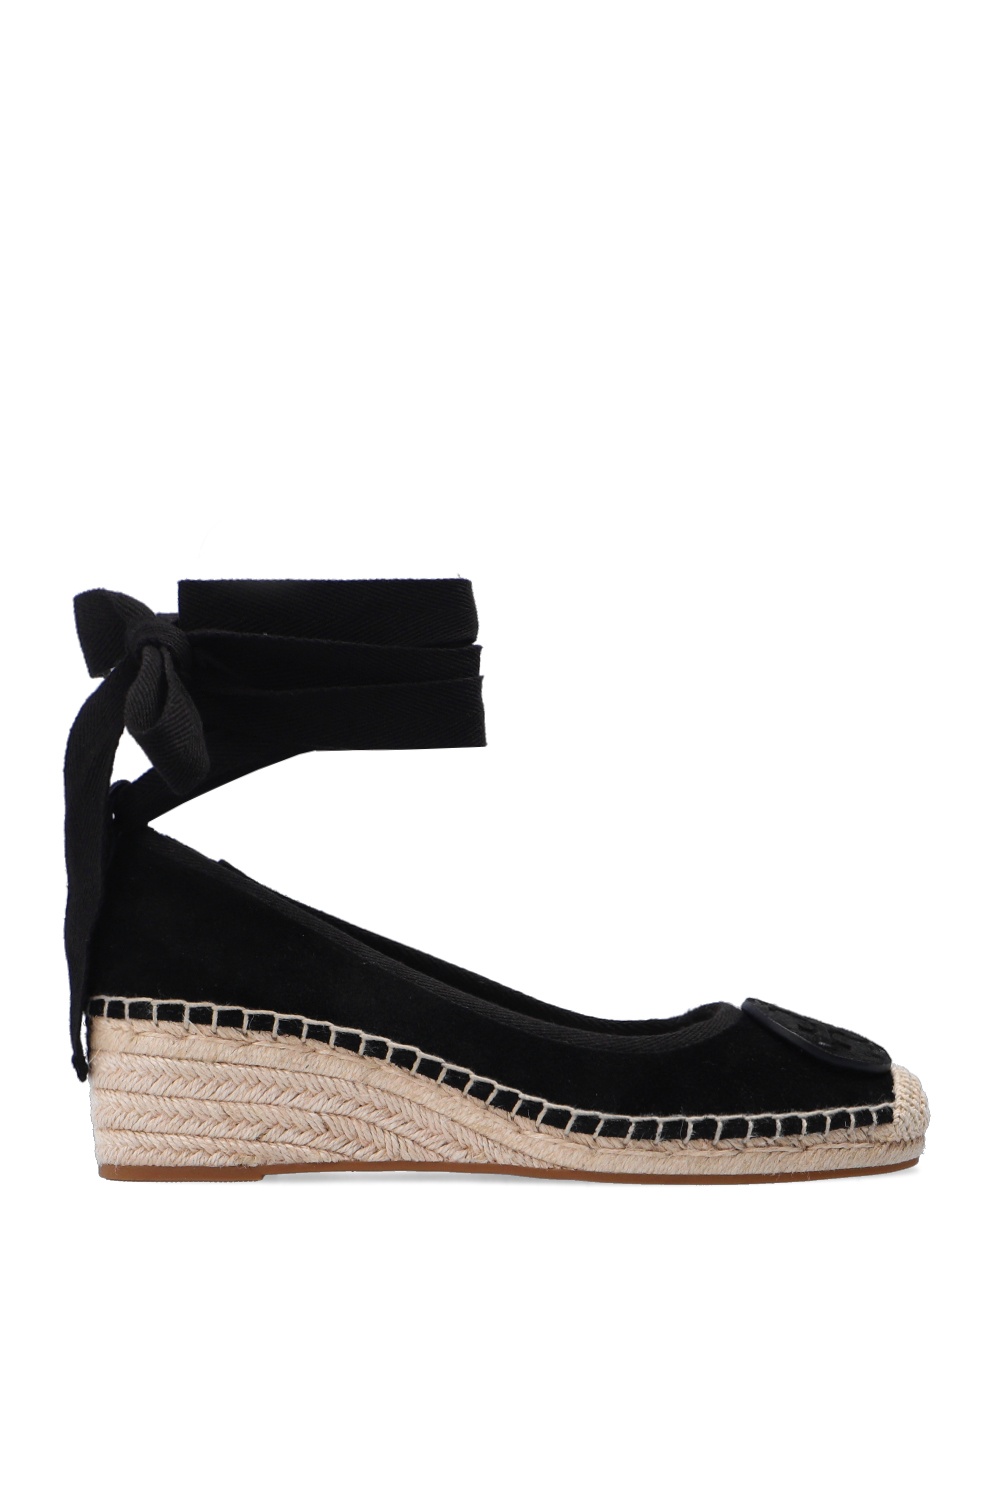 Ted Baker Epprod Sneakers nere | Women's apoyo Shoes | Tory Burch 'Minnie  Ballet' wedge espadrilles | IetpShops